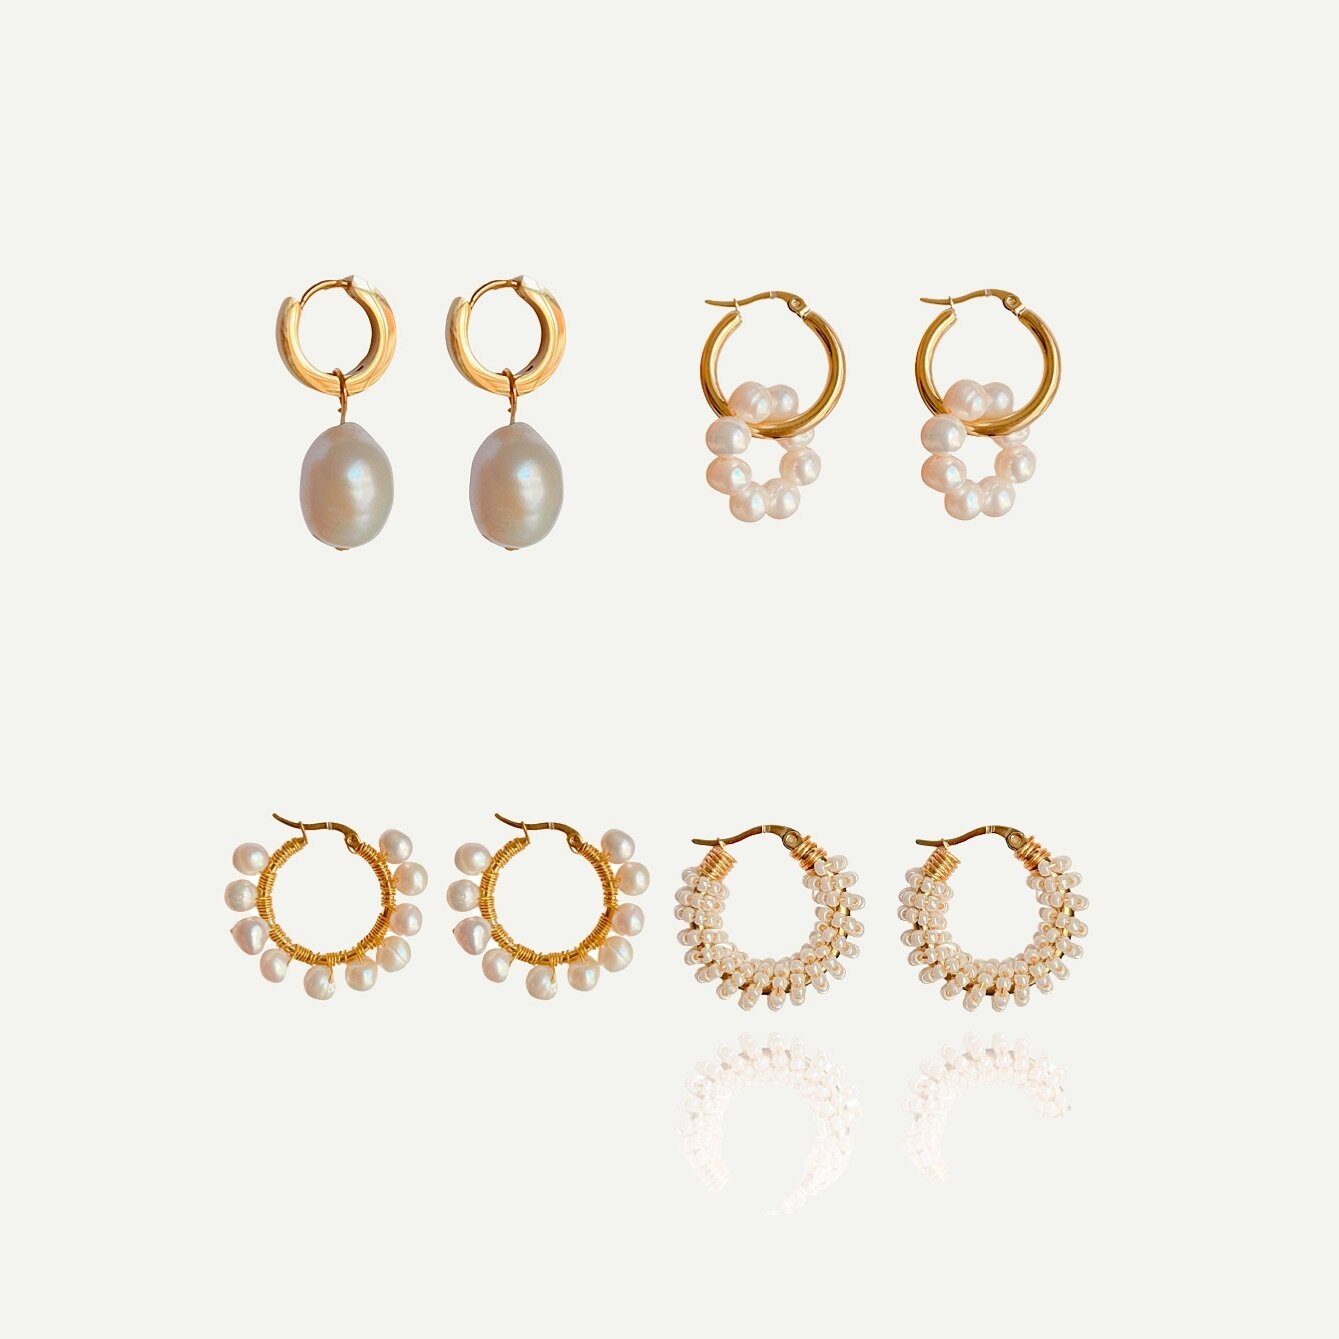 Earring restock! Available to shop online a sandypearl.co.uk🤍